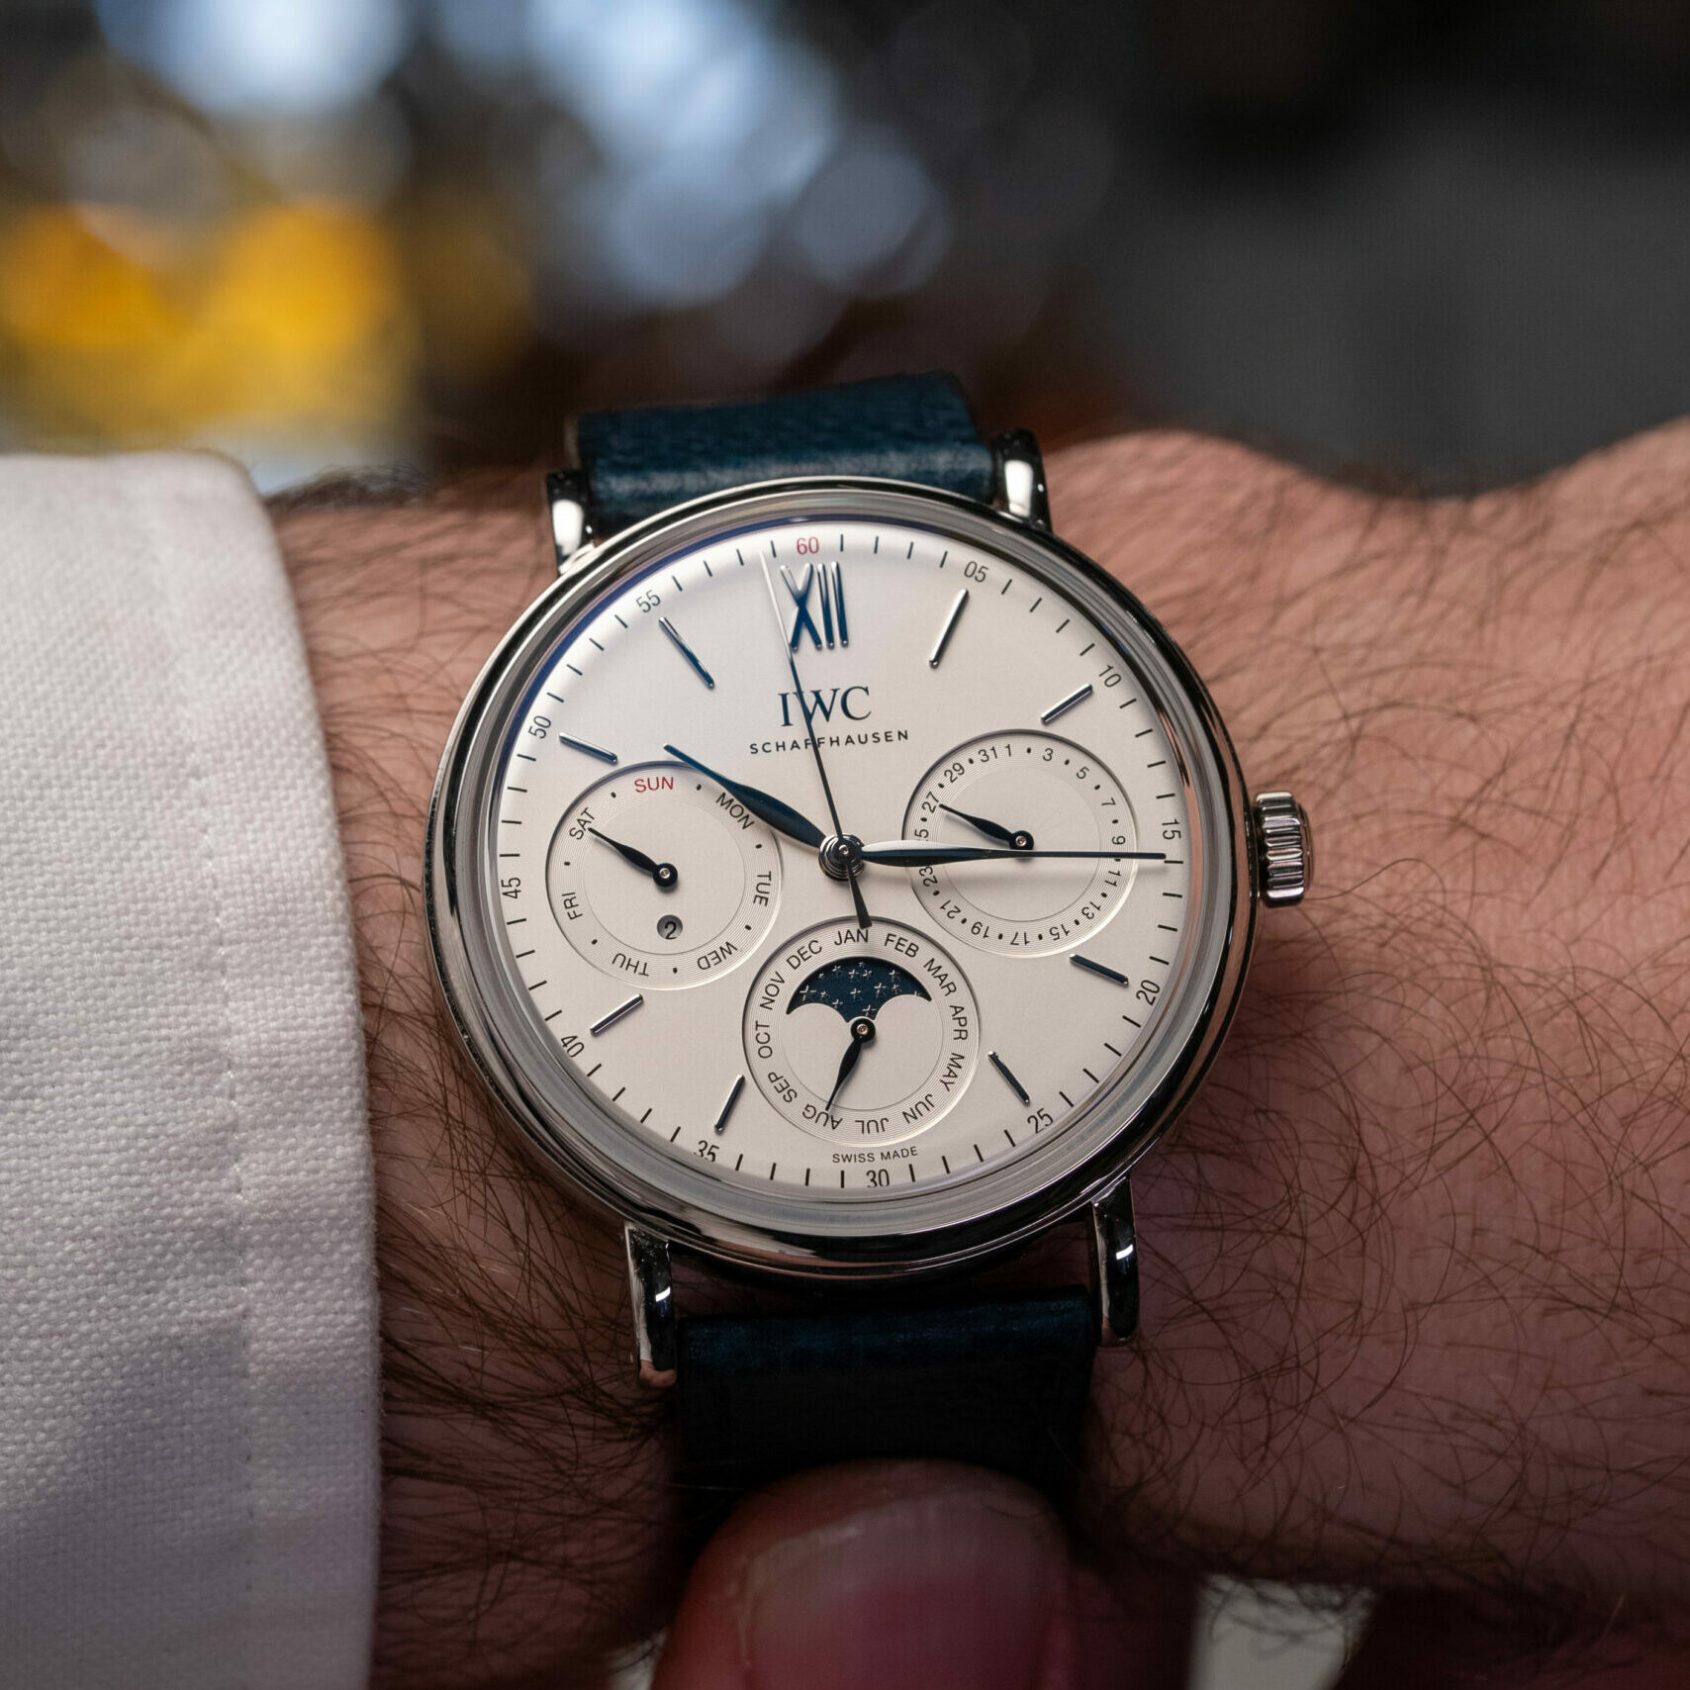 HANDS-ON: The new IWC Portofino Perpetual Calendar IW344601 and IW344602